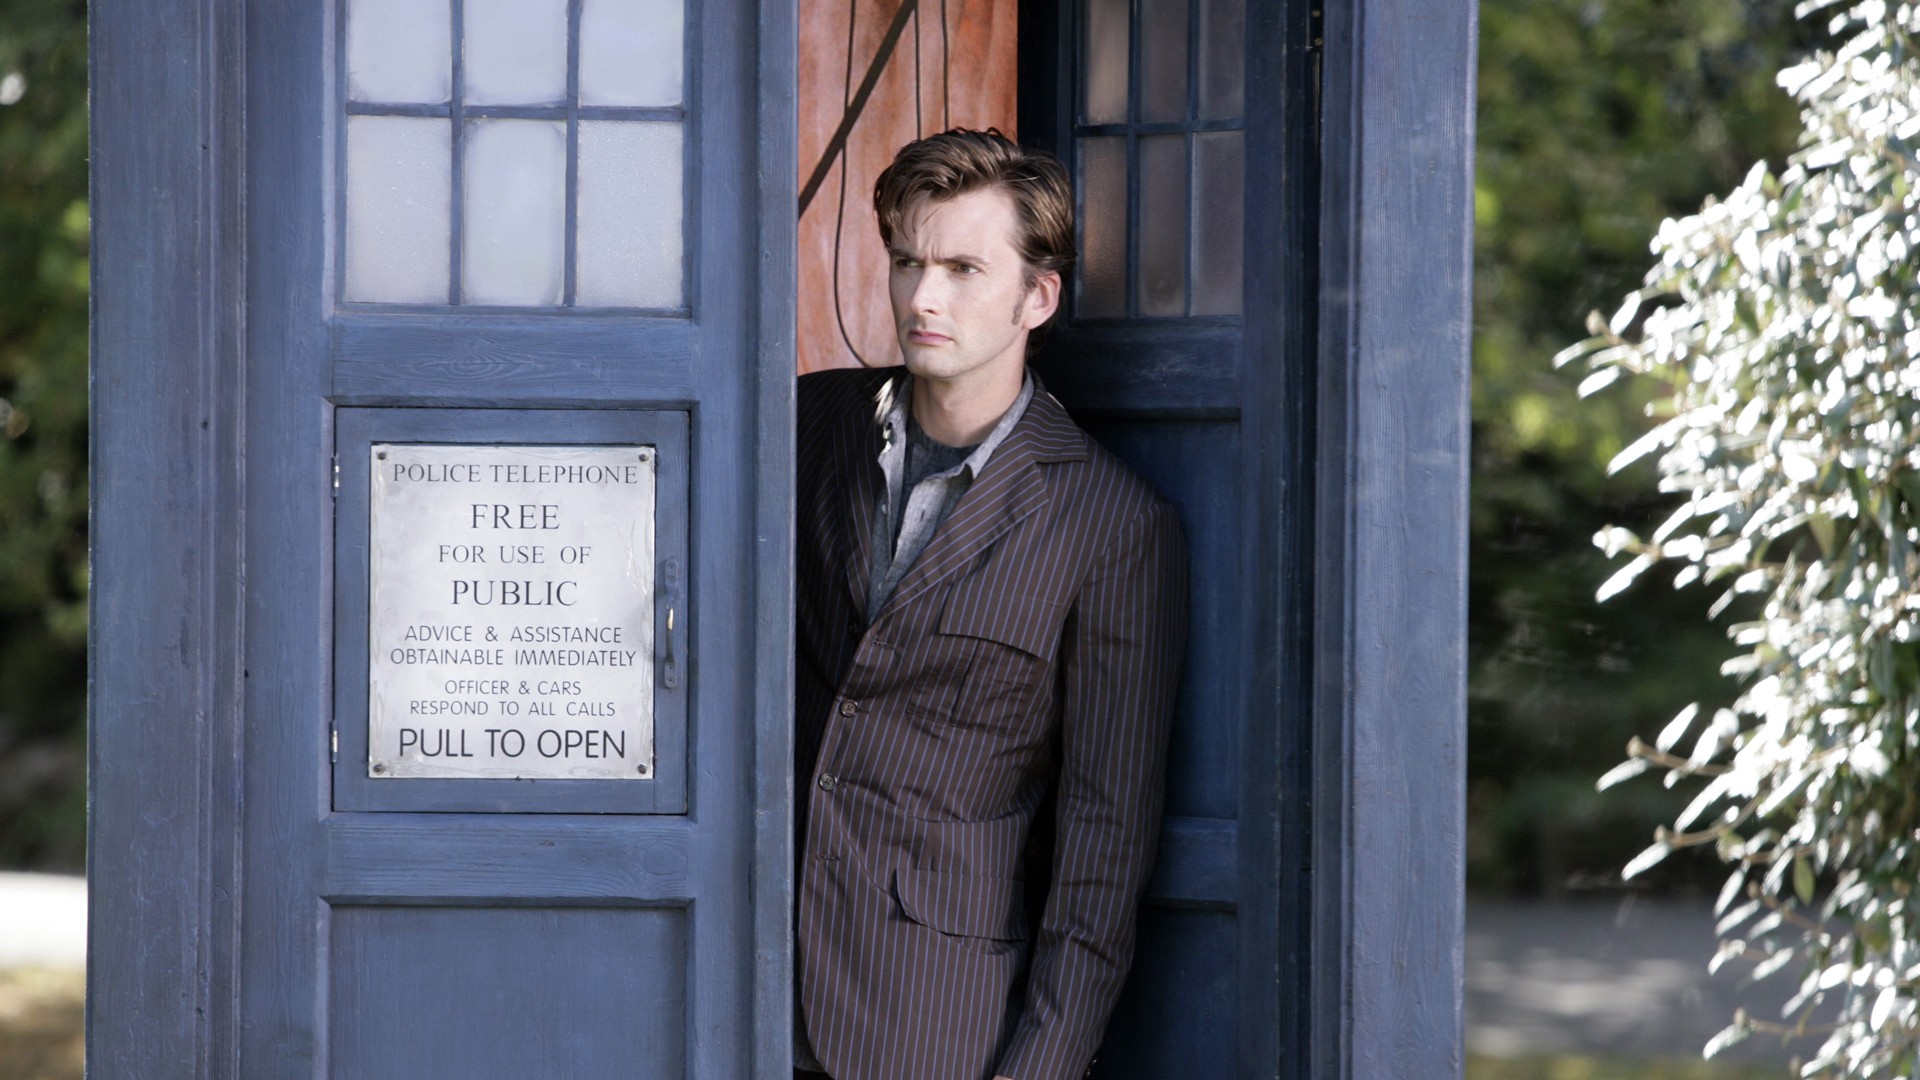 Doctor Who, The Doctor, David Tennant, Tenth Doctor, TARDIS Wallpaper